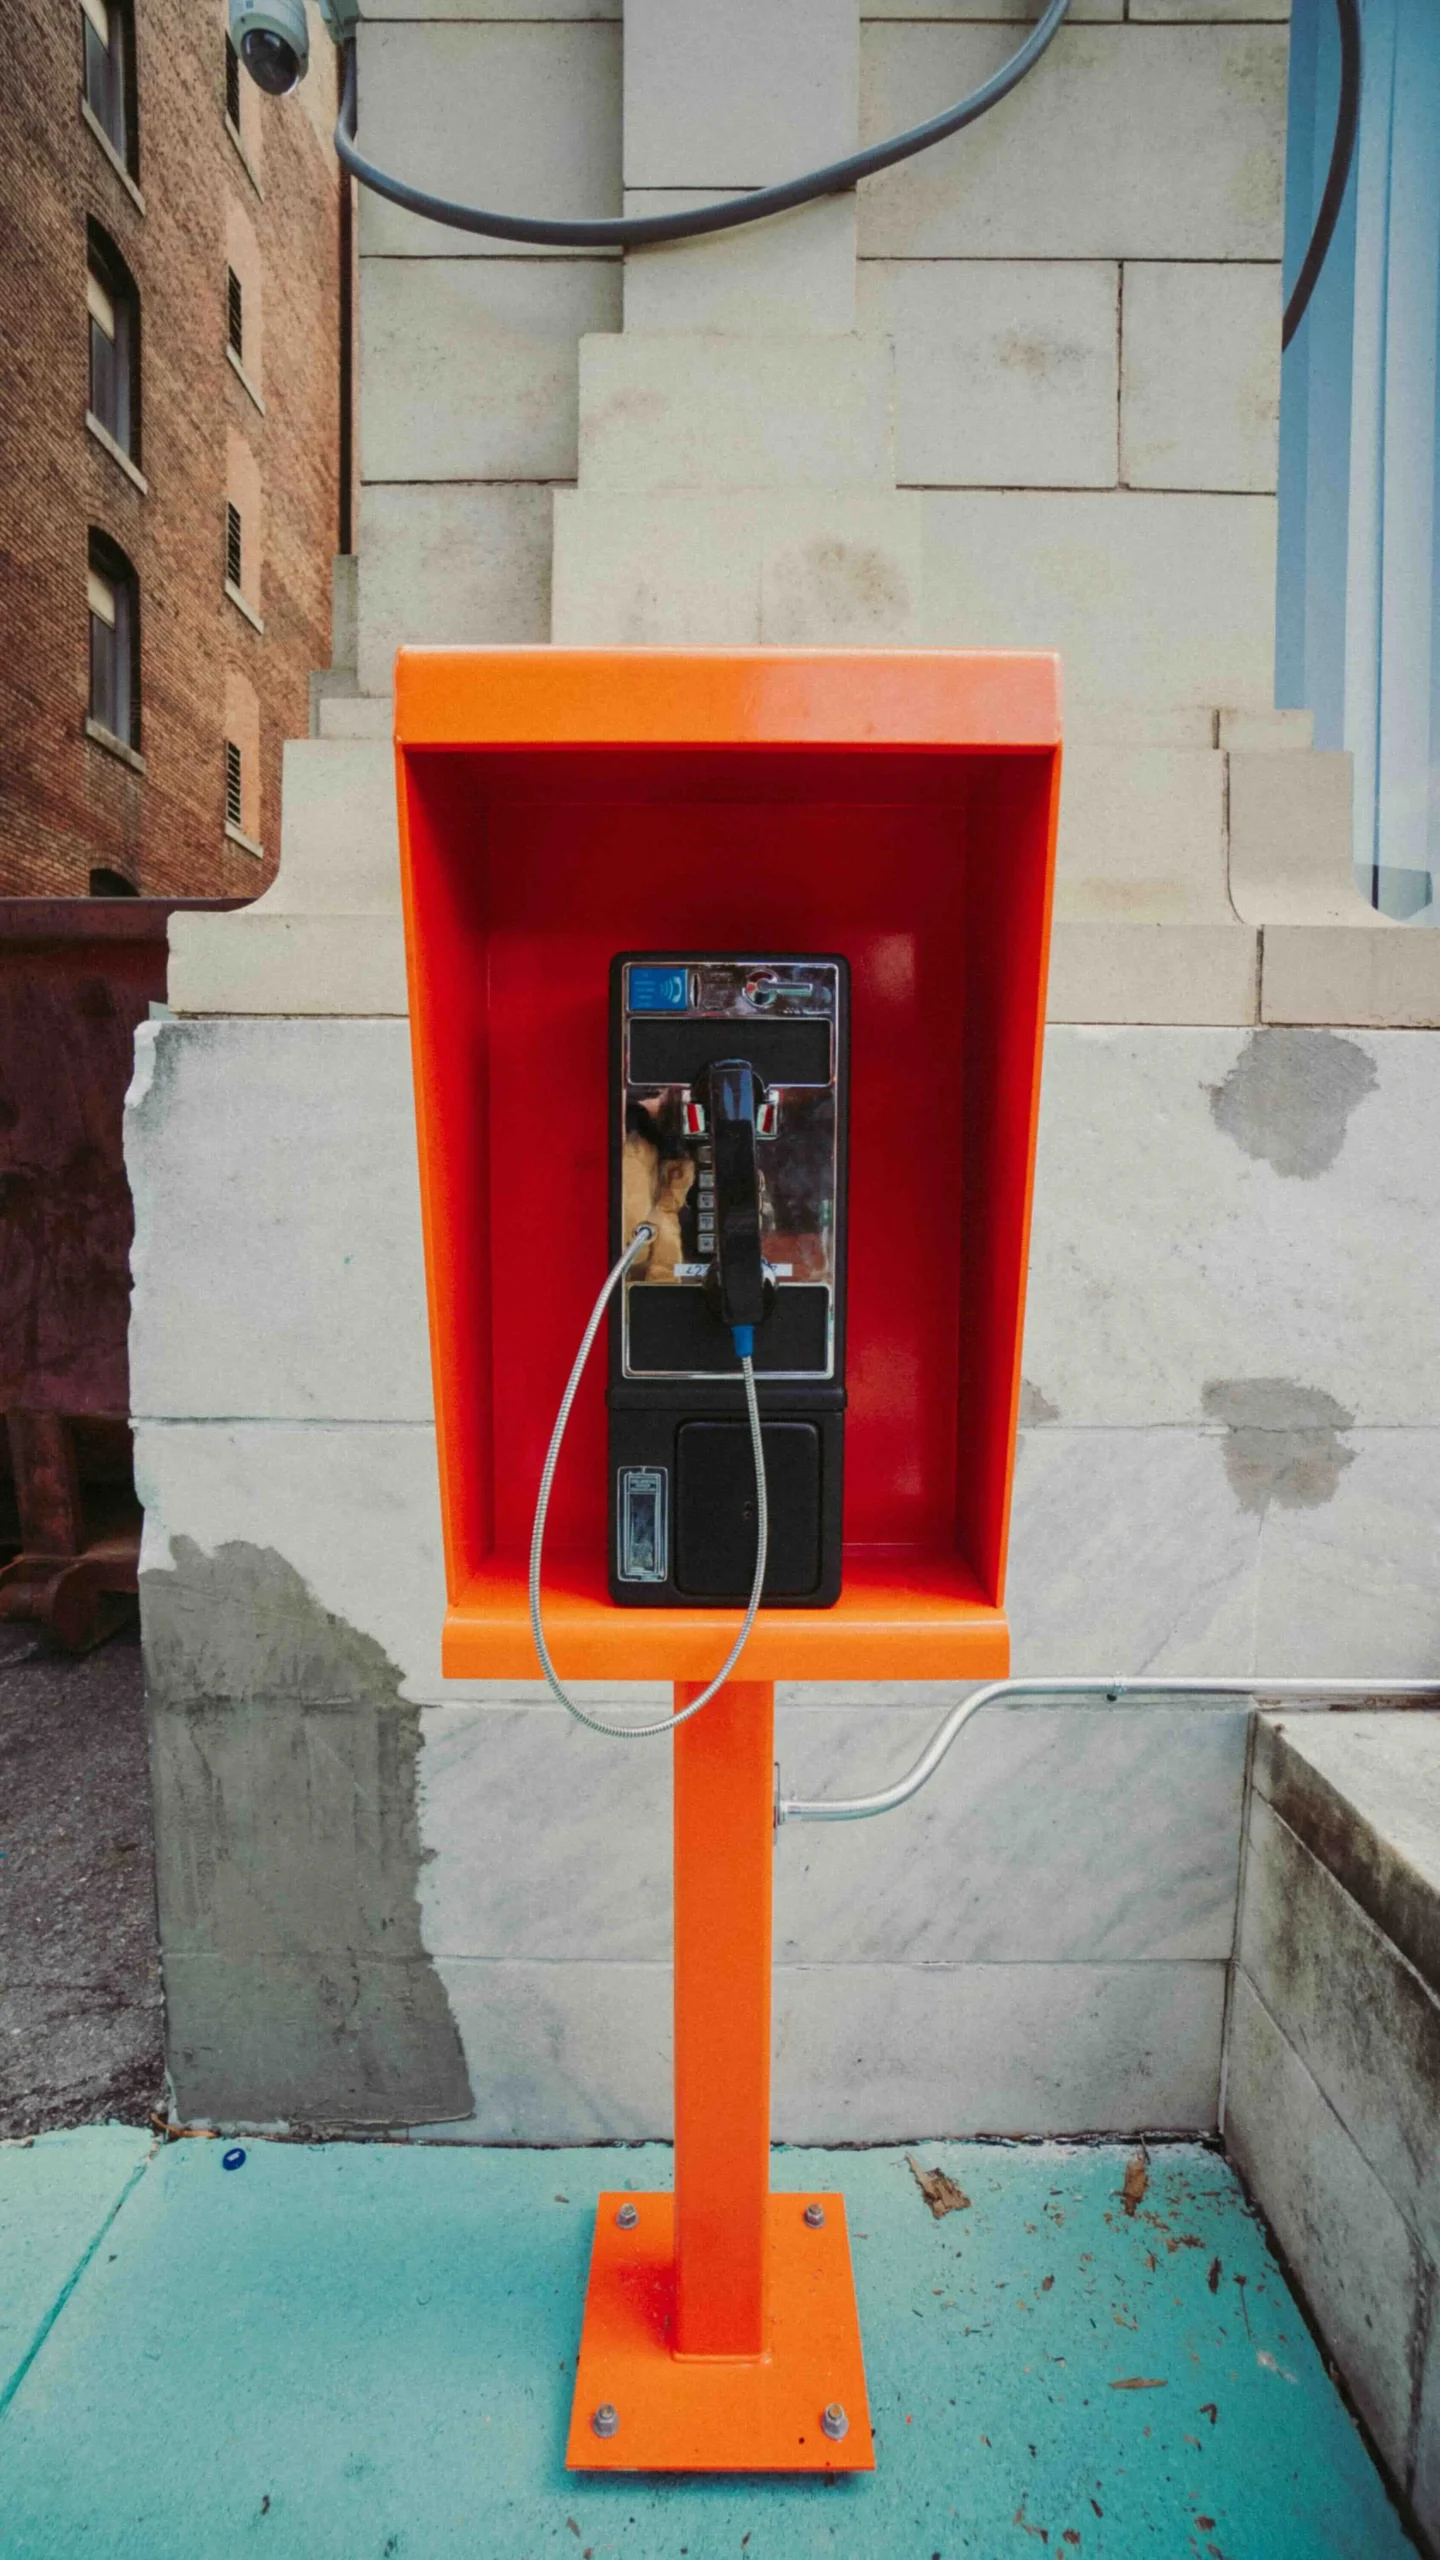 payphone on the street - dynamic phone numbers